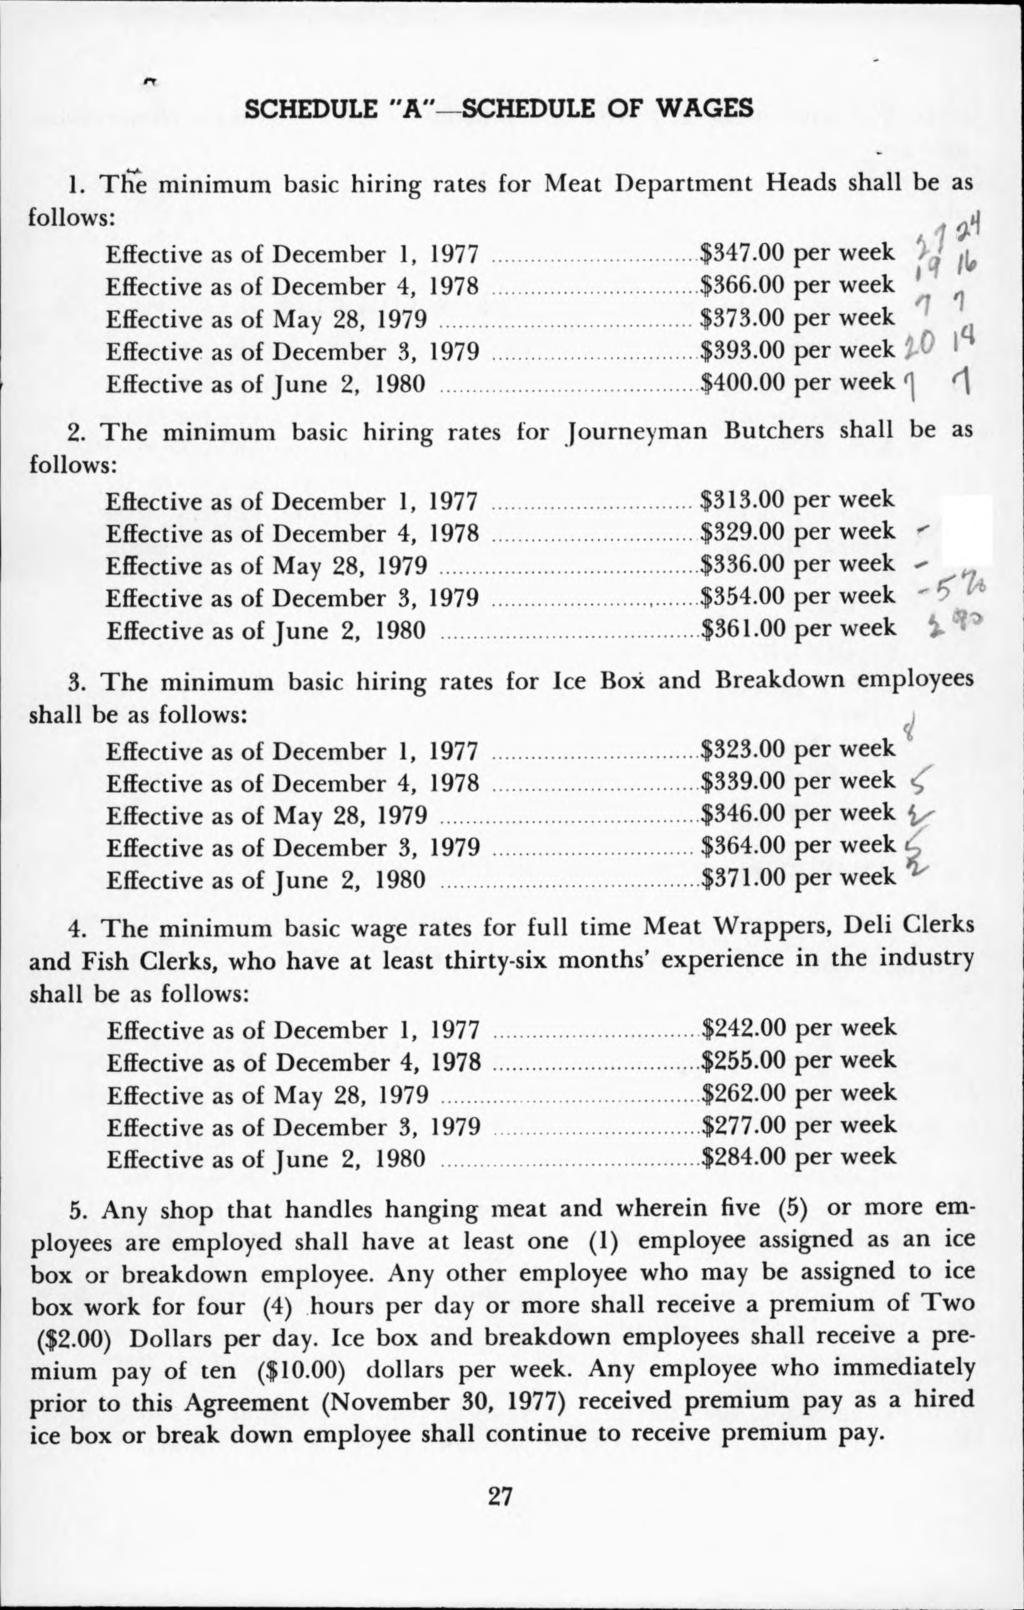 SCHEDULE "A " SCHEDULE OF WAGES 1. The minimum basic hiring rates for Meat Department Heads shall be as follows: Effective as of December 1, 1977 $347.00 per week /j